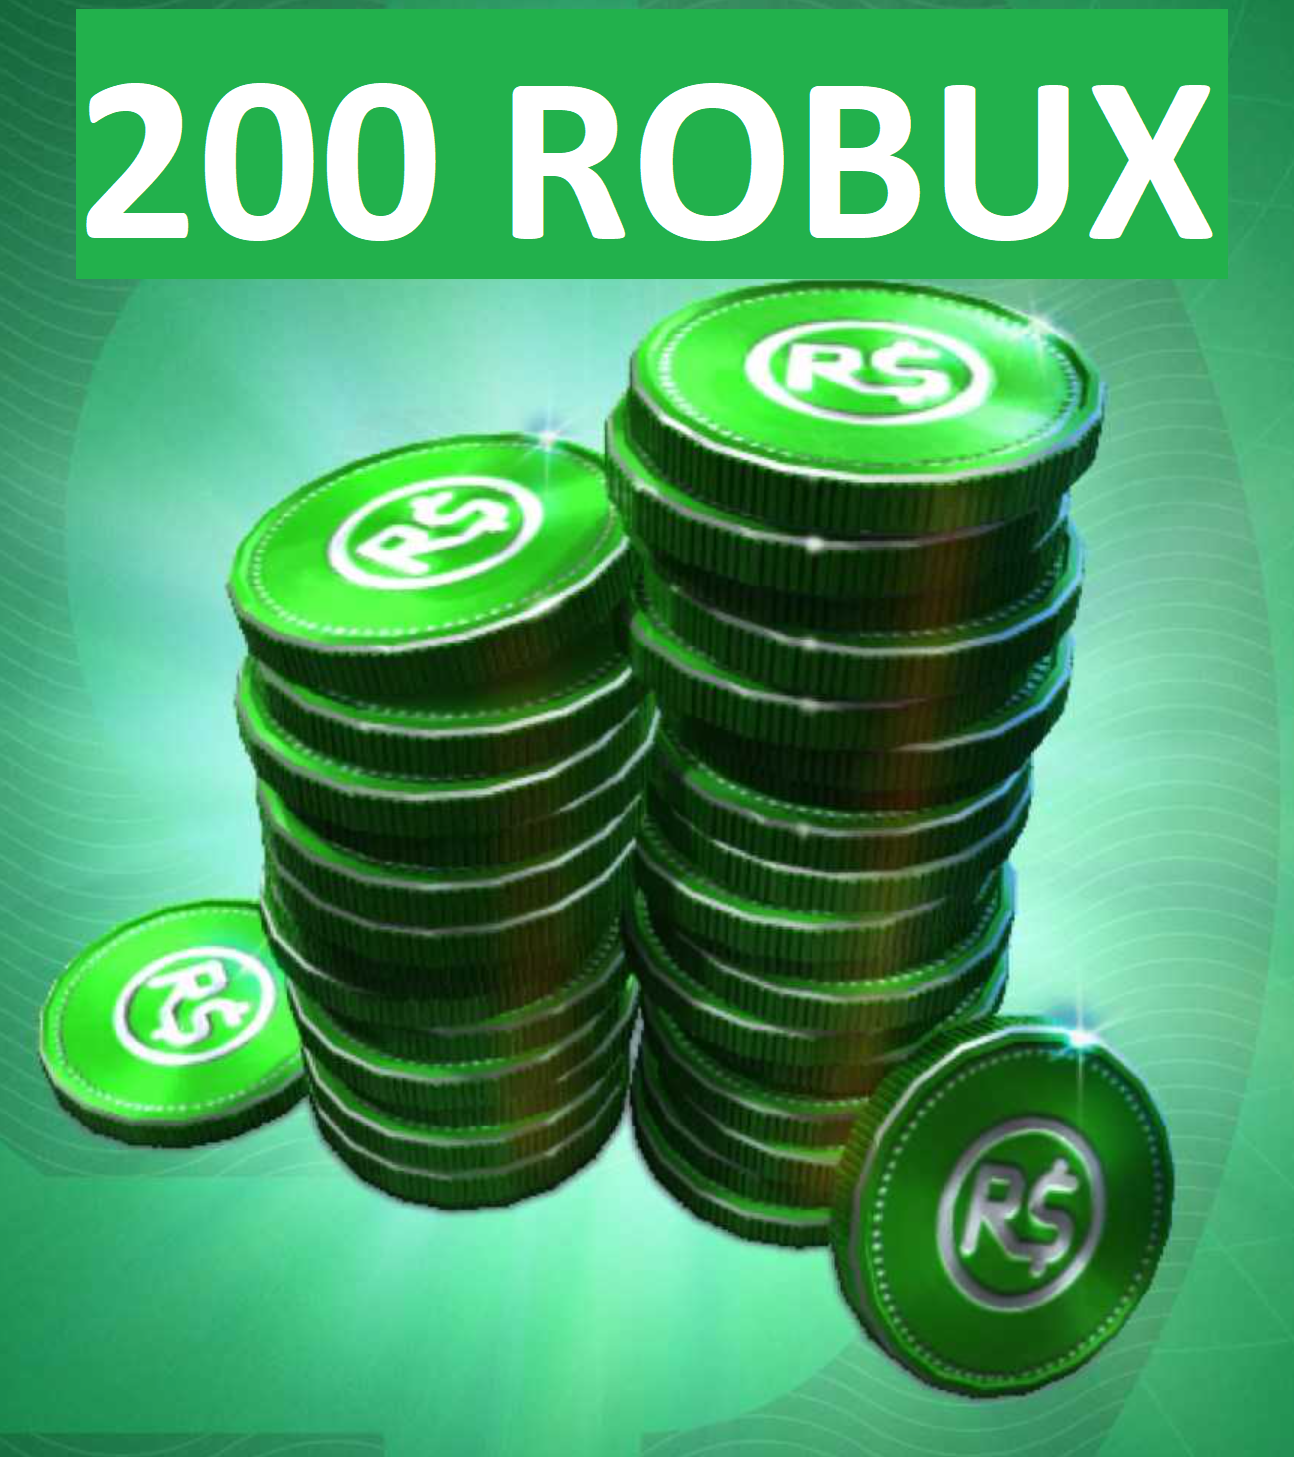 Buy Roblox Gift Card 200 Robux Global And Download - roblox 200 robux